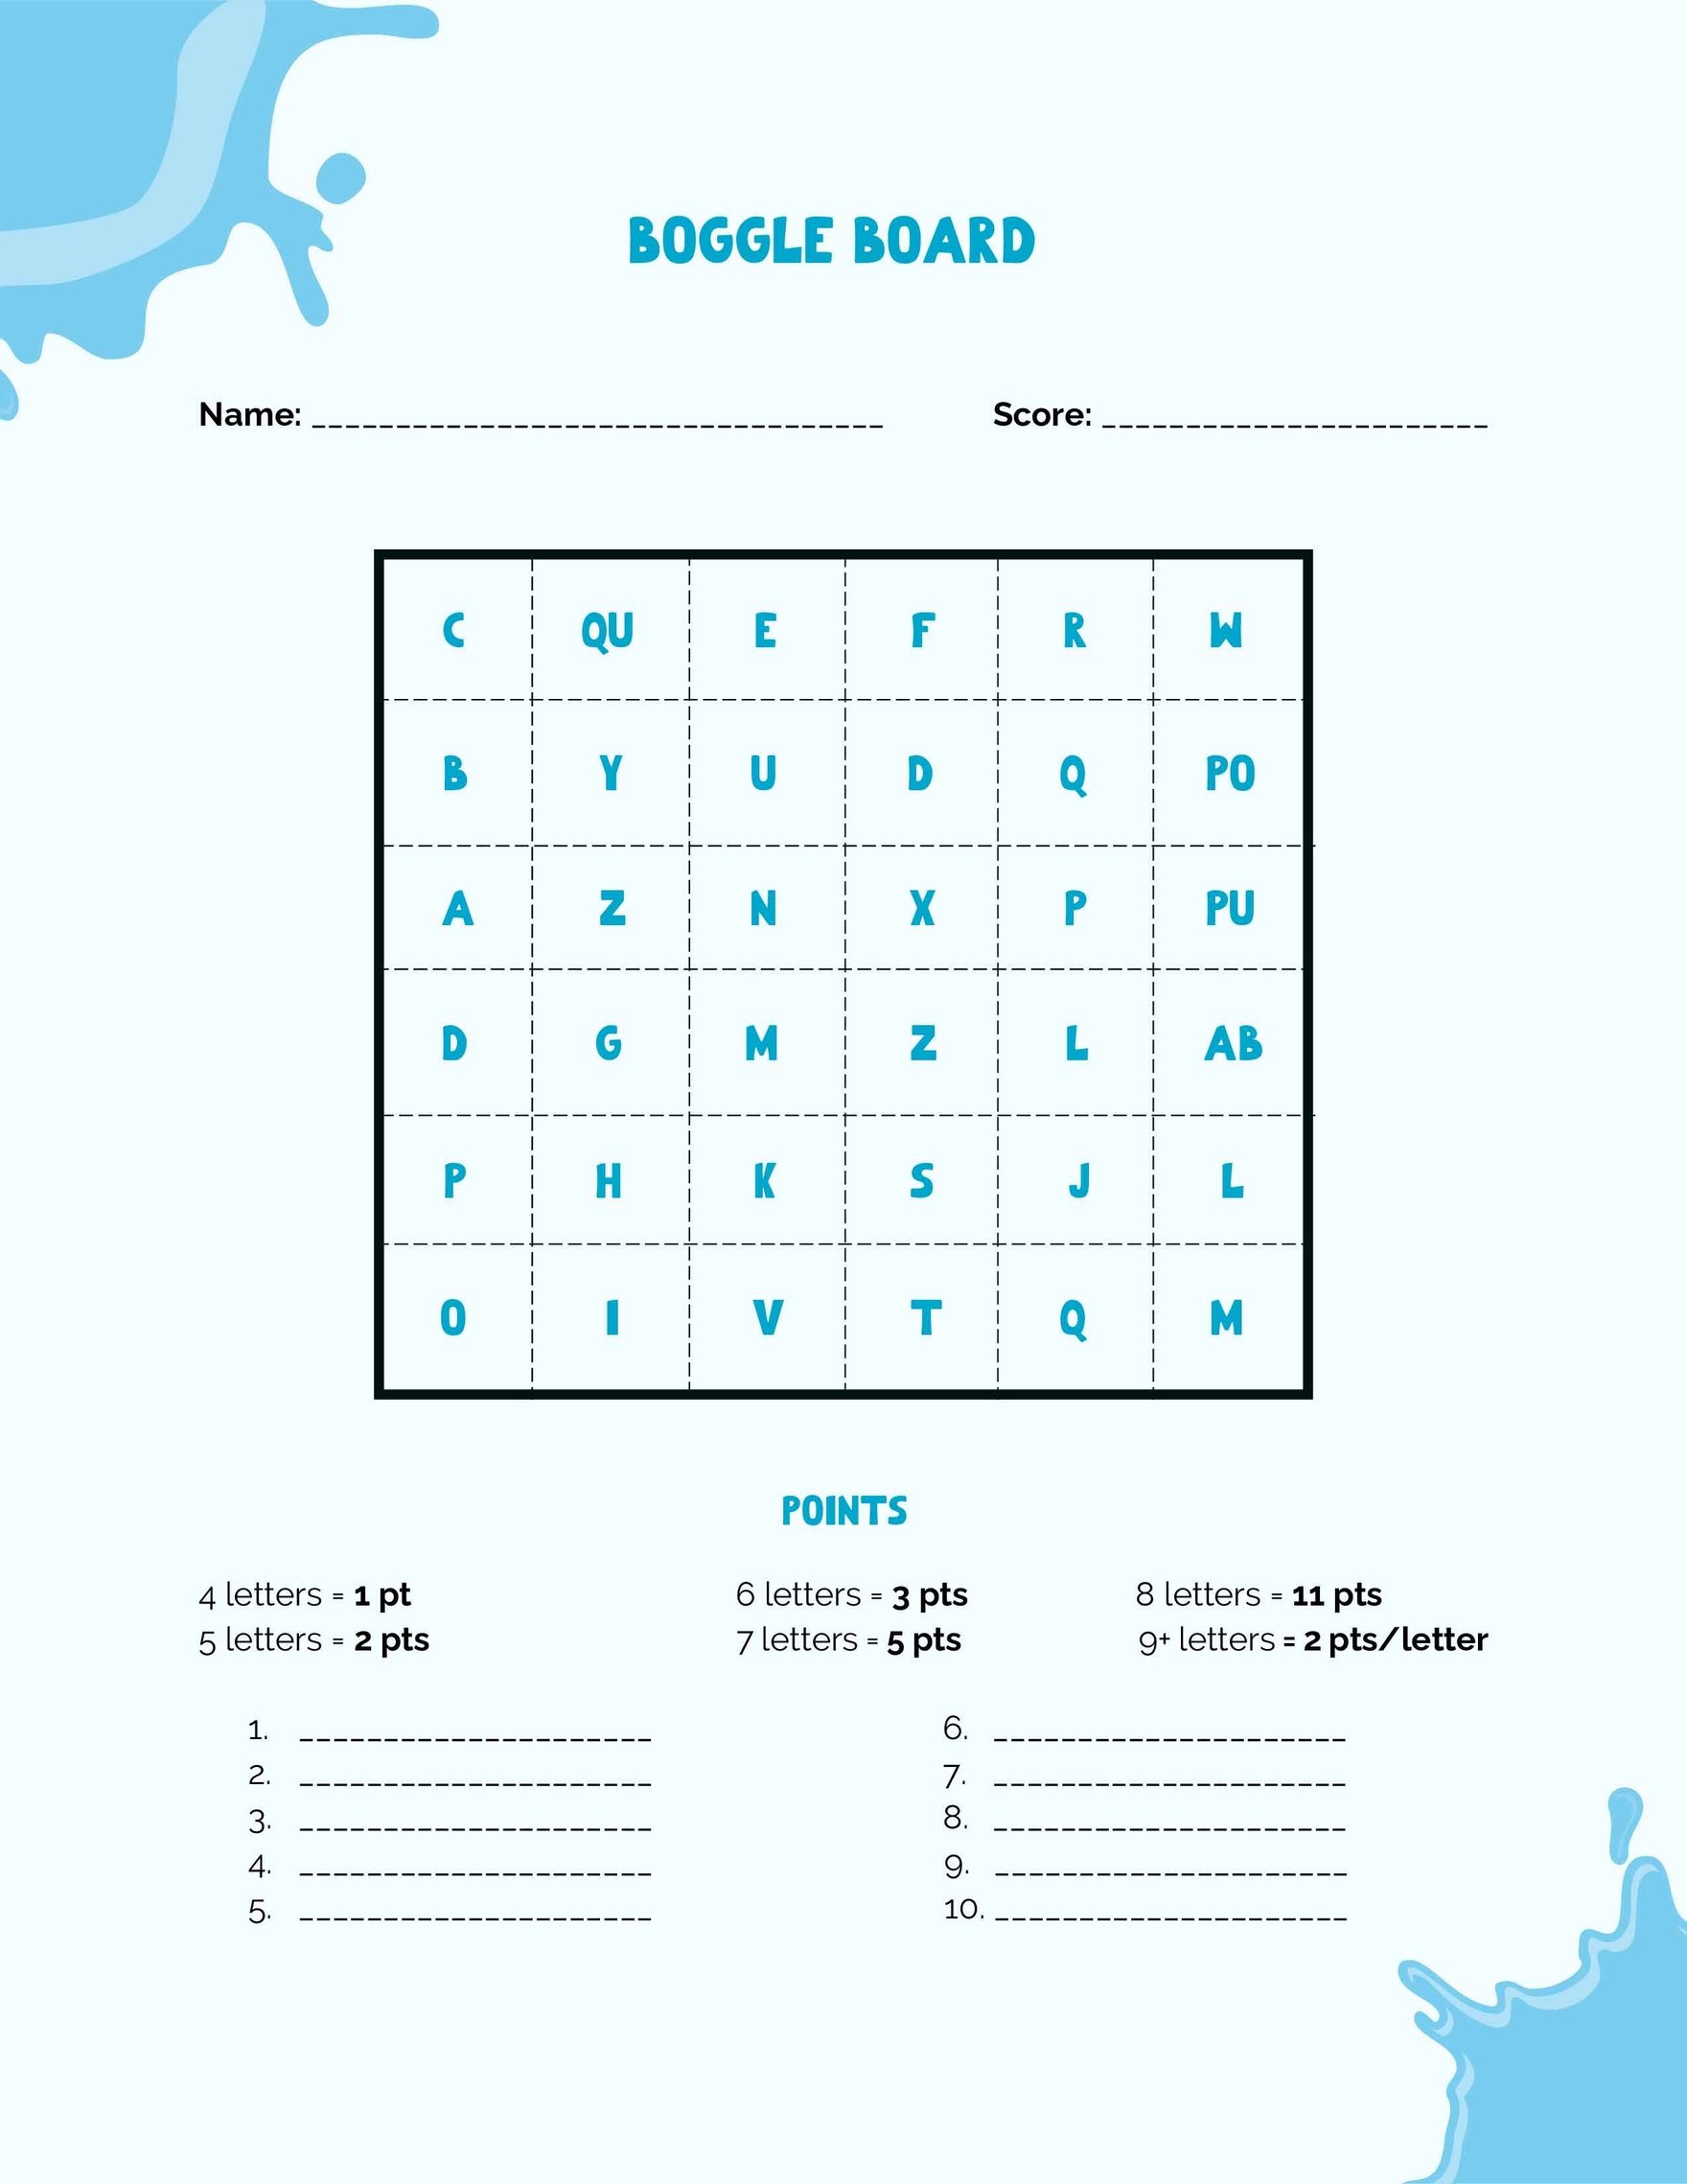 Boggle Board Template in Word, Google Docs, PDF, Apple Pages